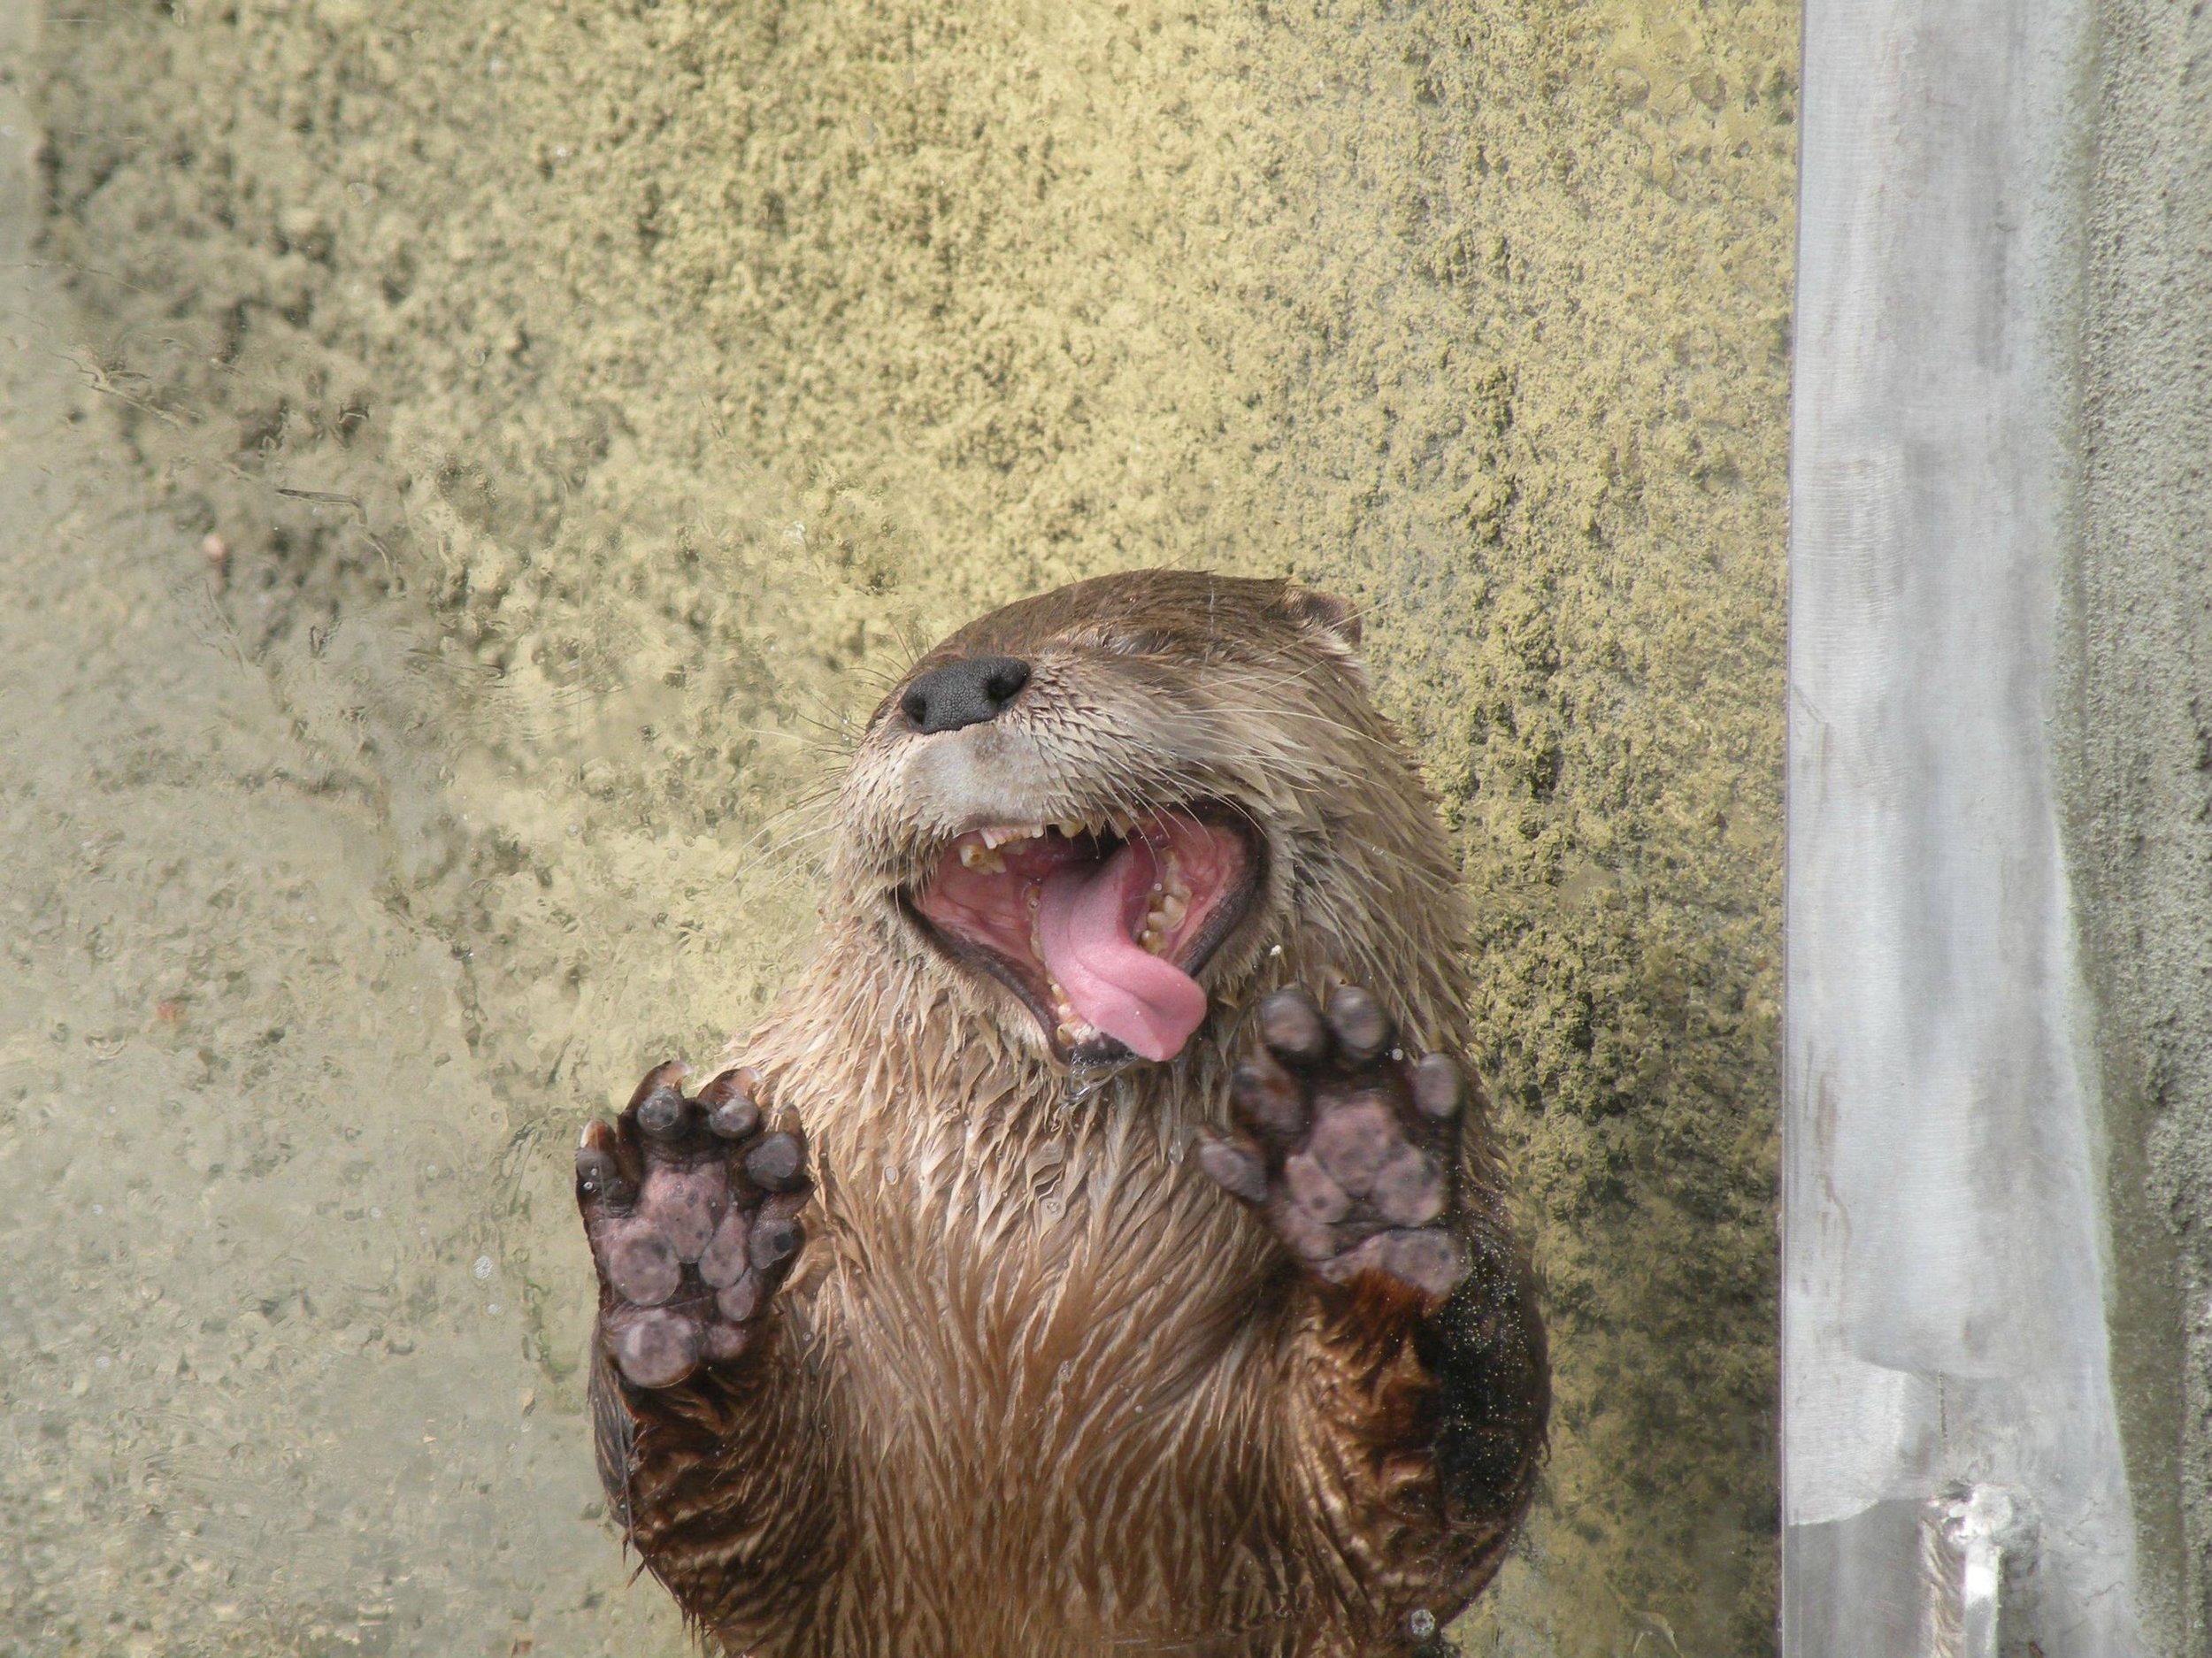 Otter Makes Goofy Faces through the Glass